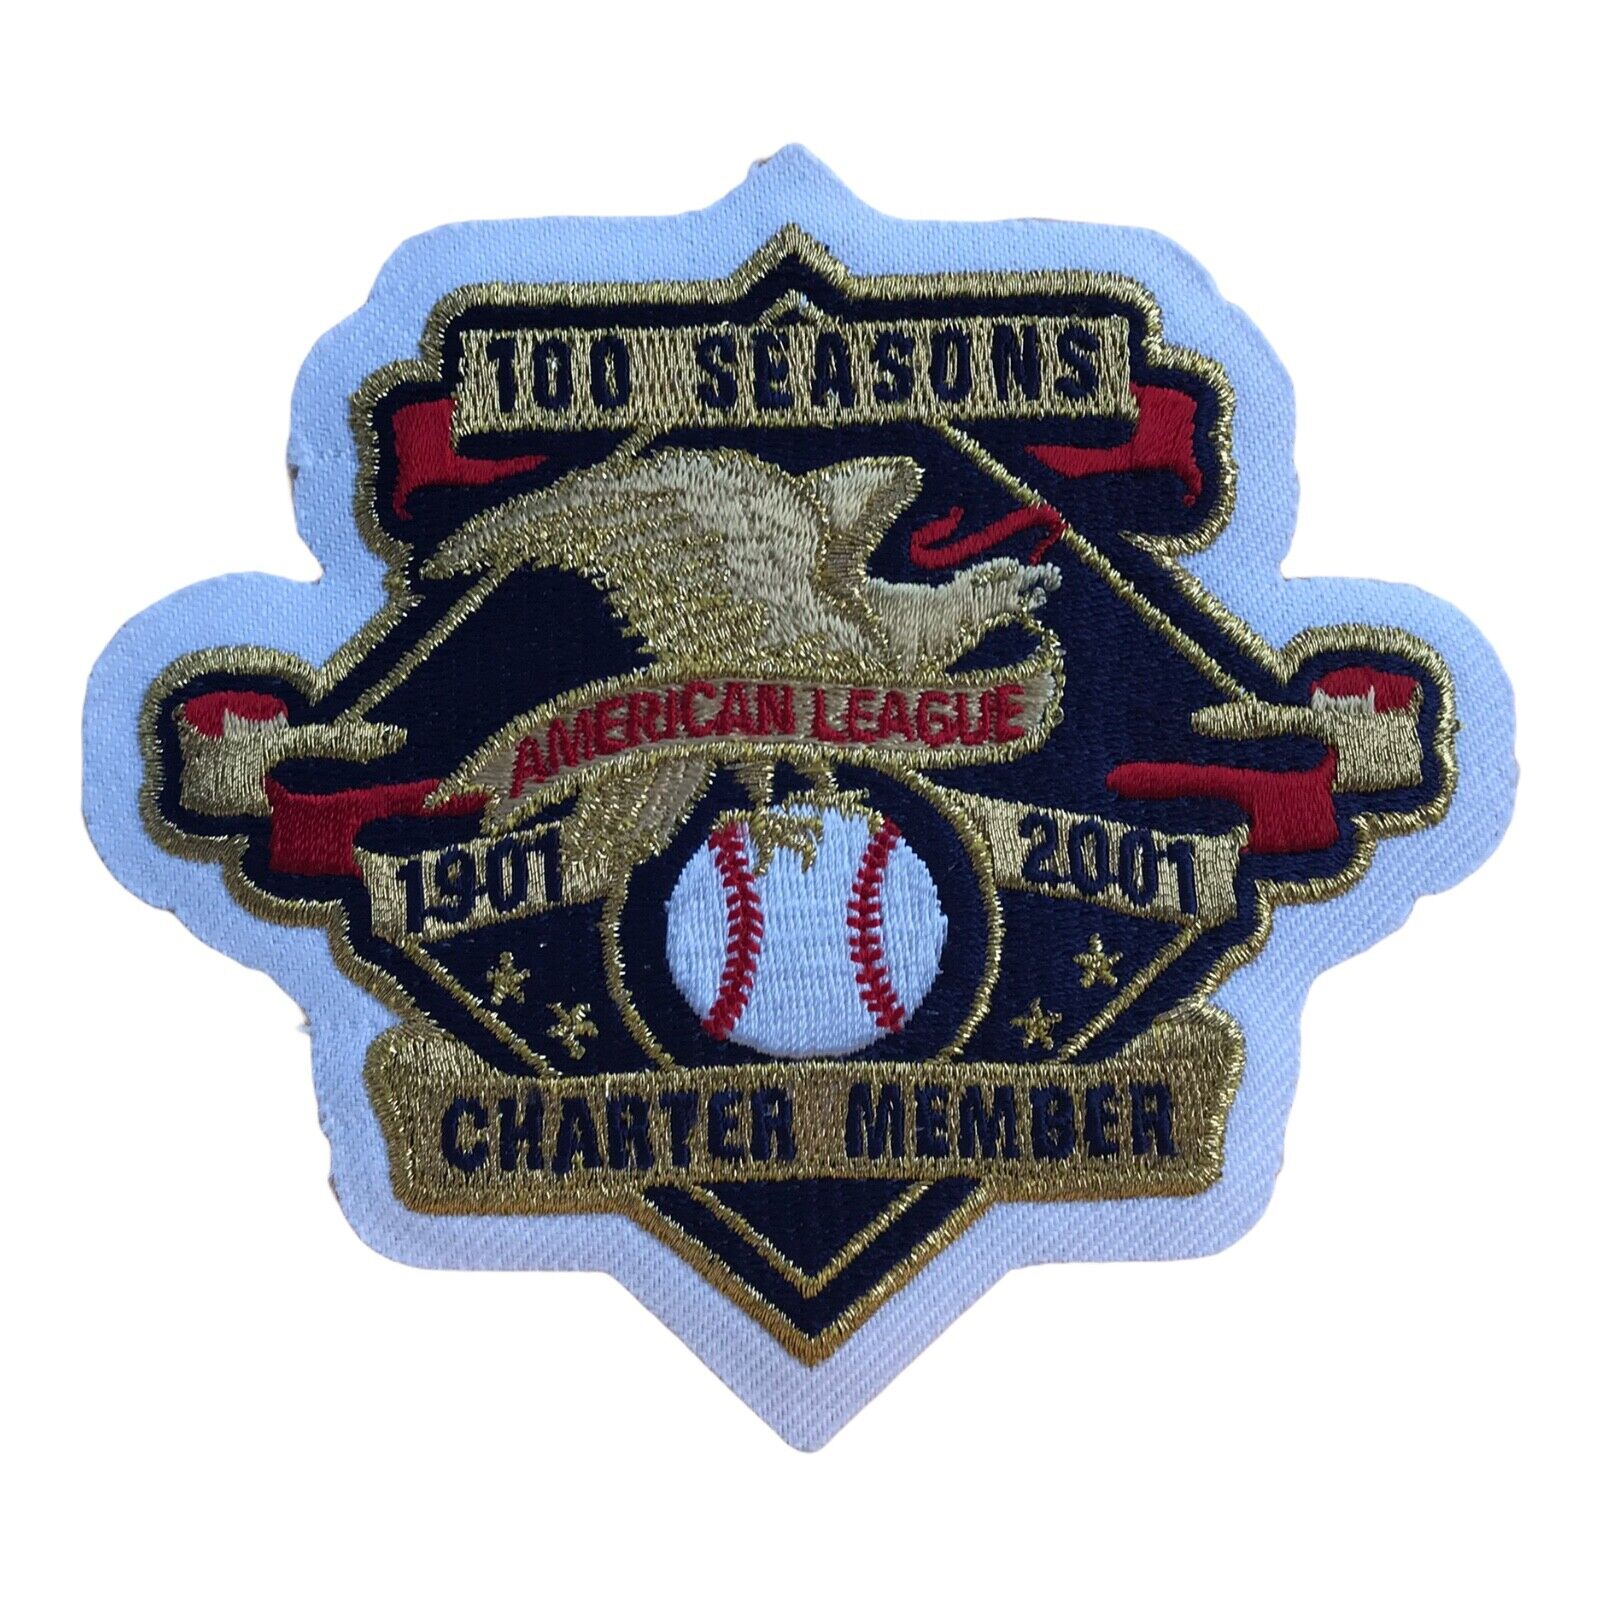 2001 AMERICAN LEAGUE 100 YEARS CHARTER MEMBER OFFICIAL MLB BASEBALL JERSEY PATCH